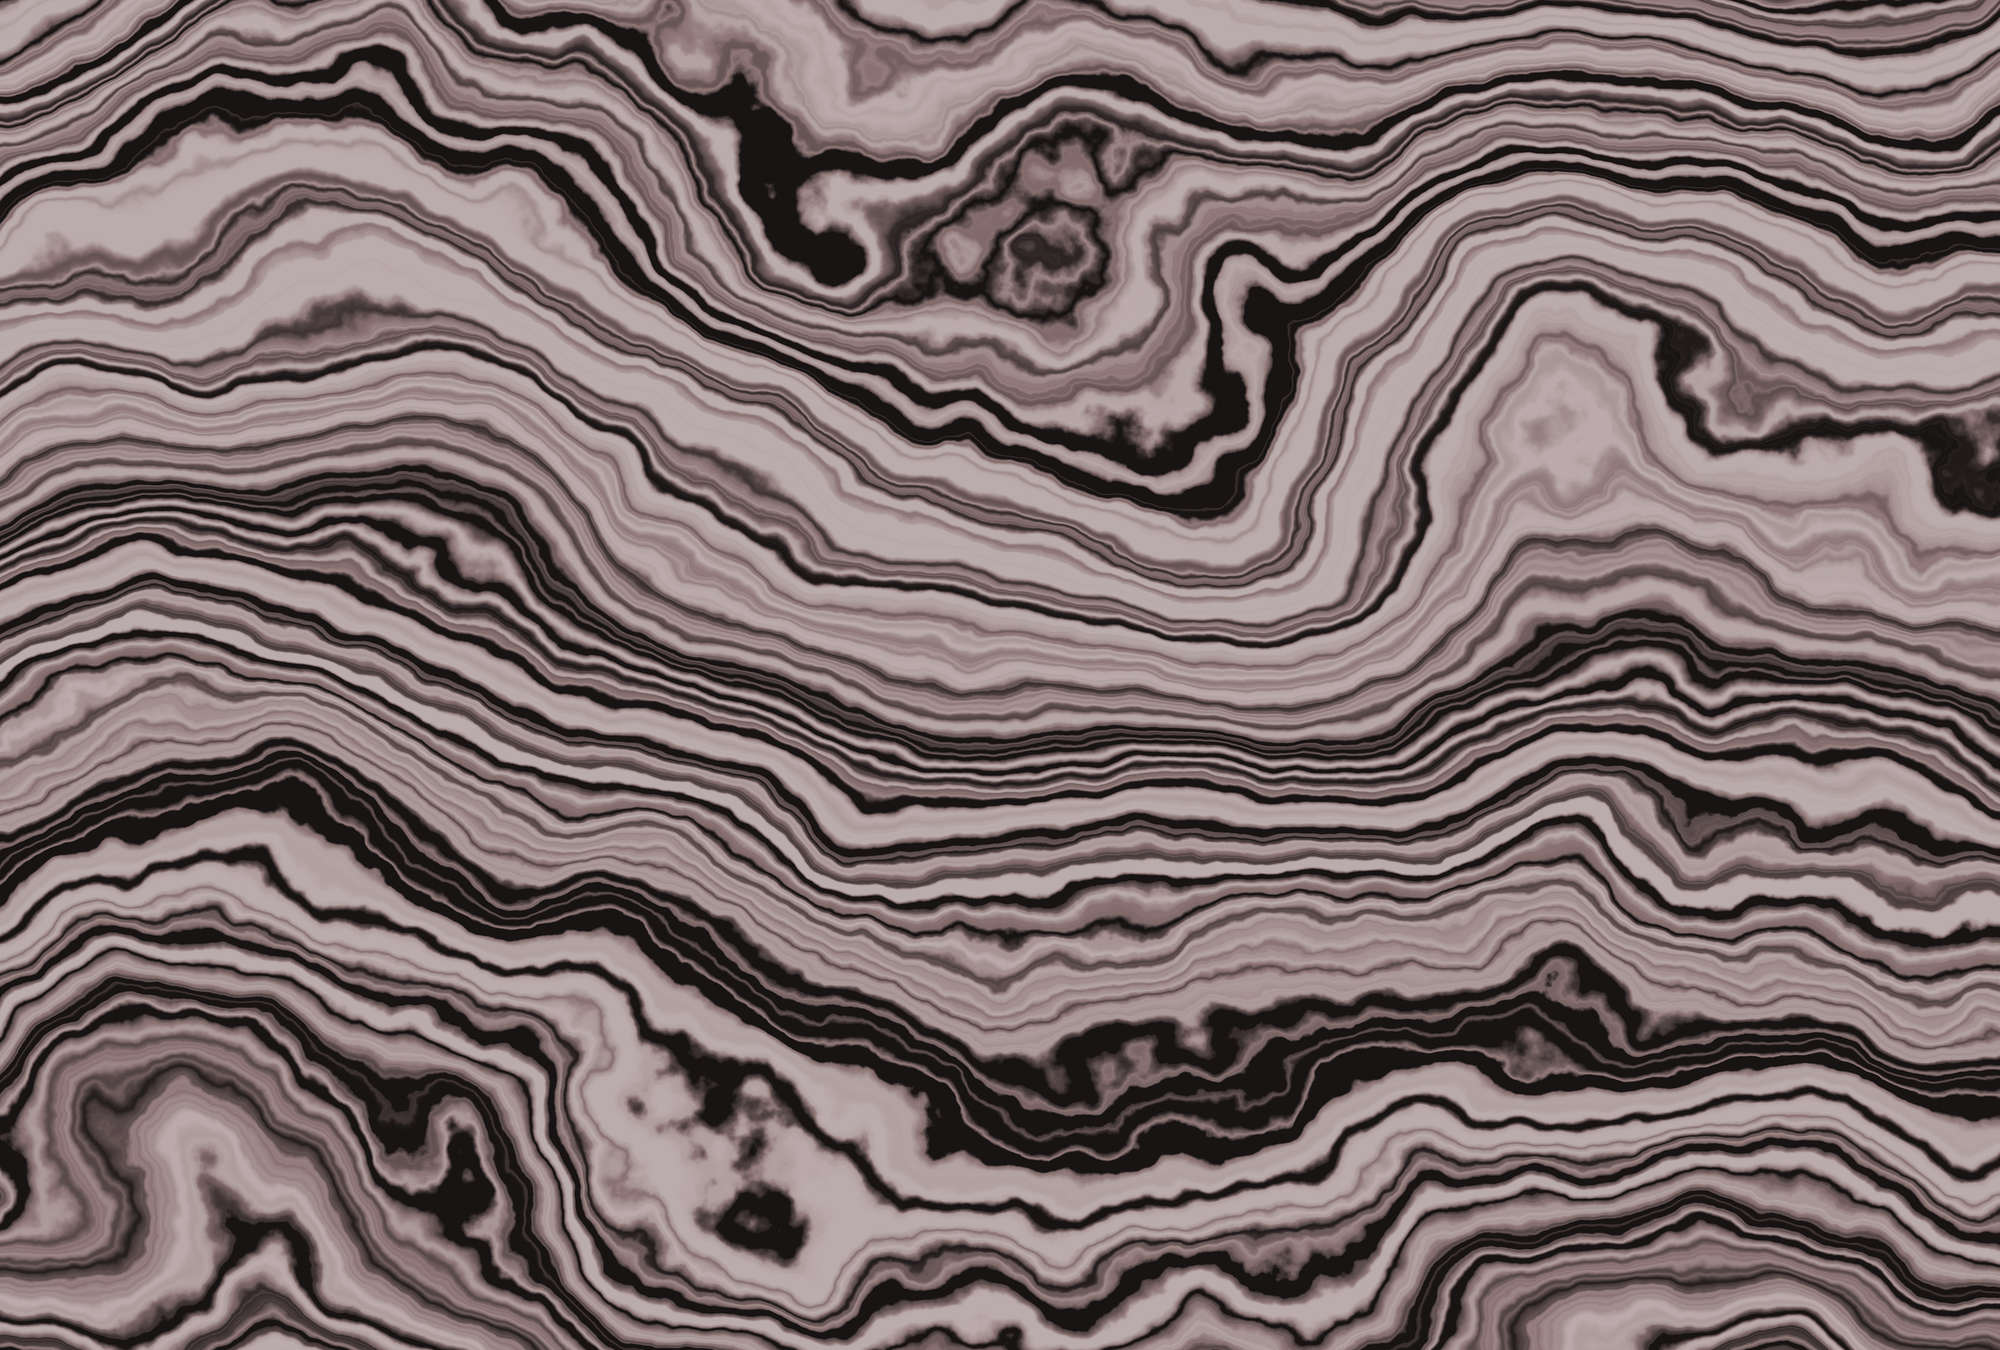             Onyx 3 - Cross-section of an onyx marble as a photo wallpaper - Pink, Black | Pearl smooth fleece
        